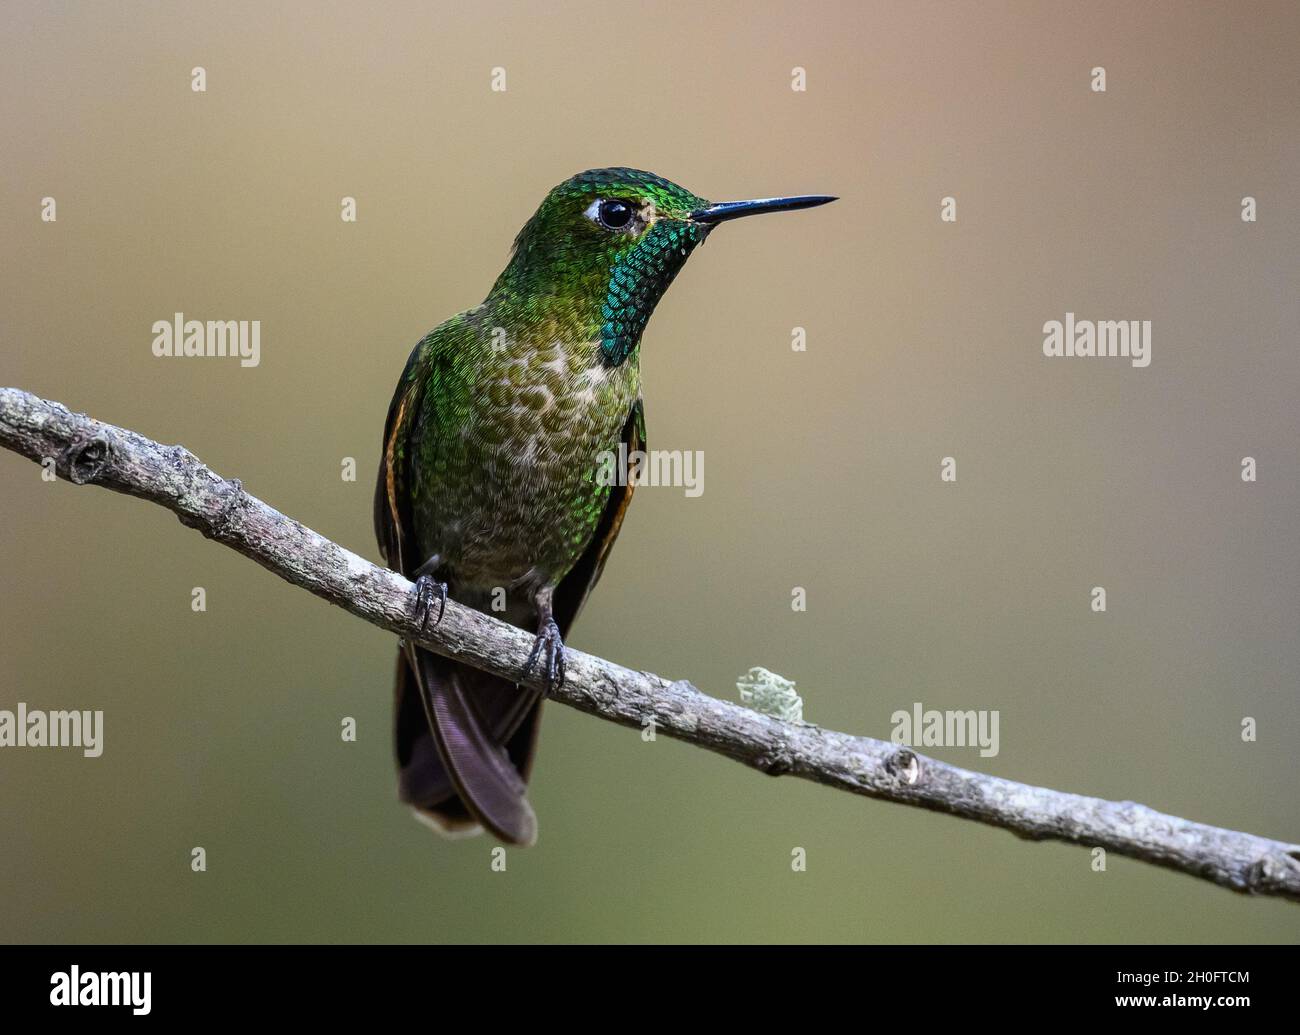 A Tyrian Metaltail (Metallura tyrianthina) hummingbird with shinning green plumge perched on a branch. Cuzco, Peru, South America. Stock Photo